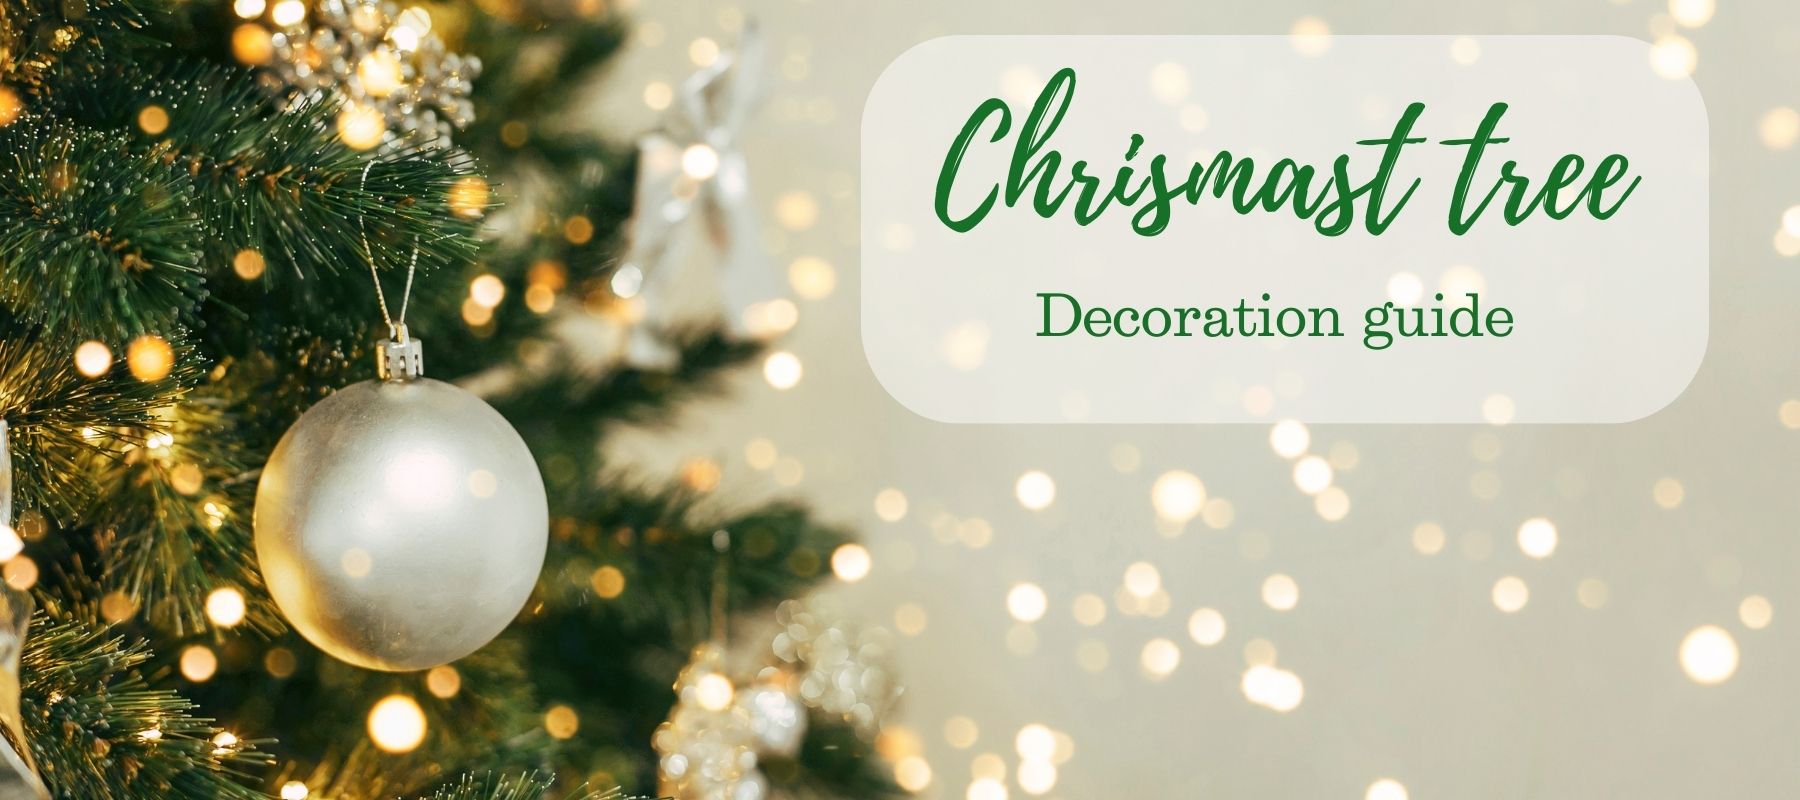 Christmas Tree Decorations: The Completed Guide